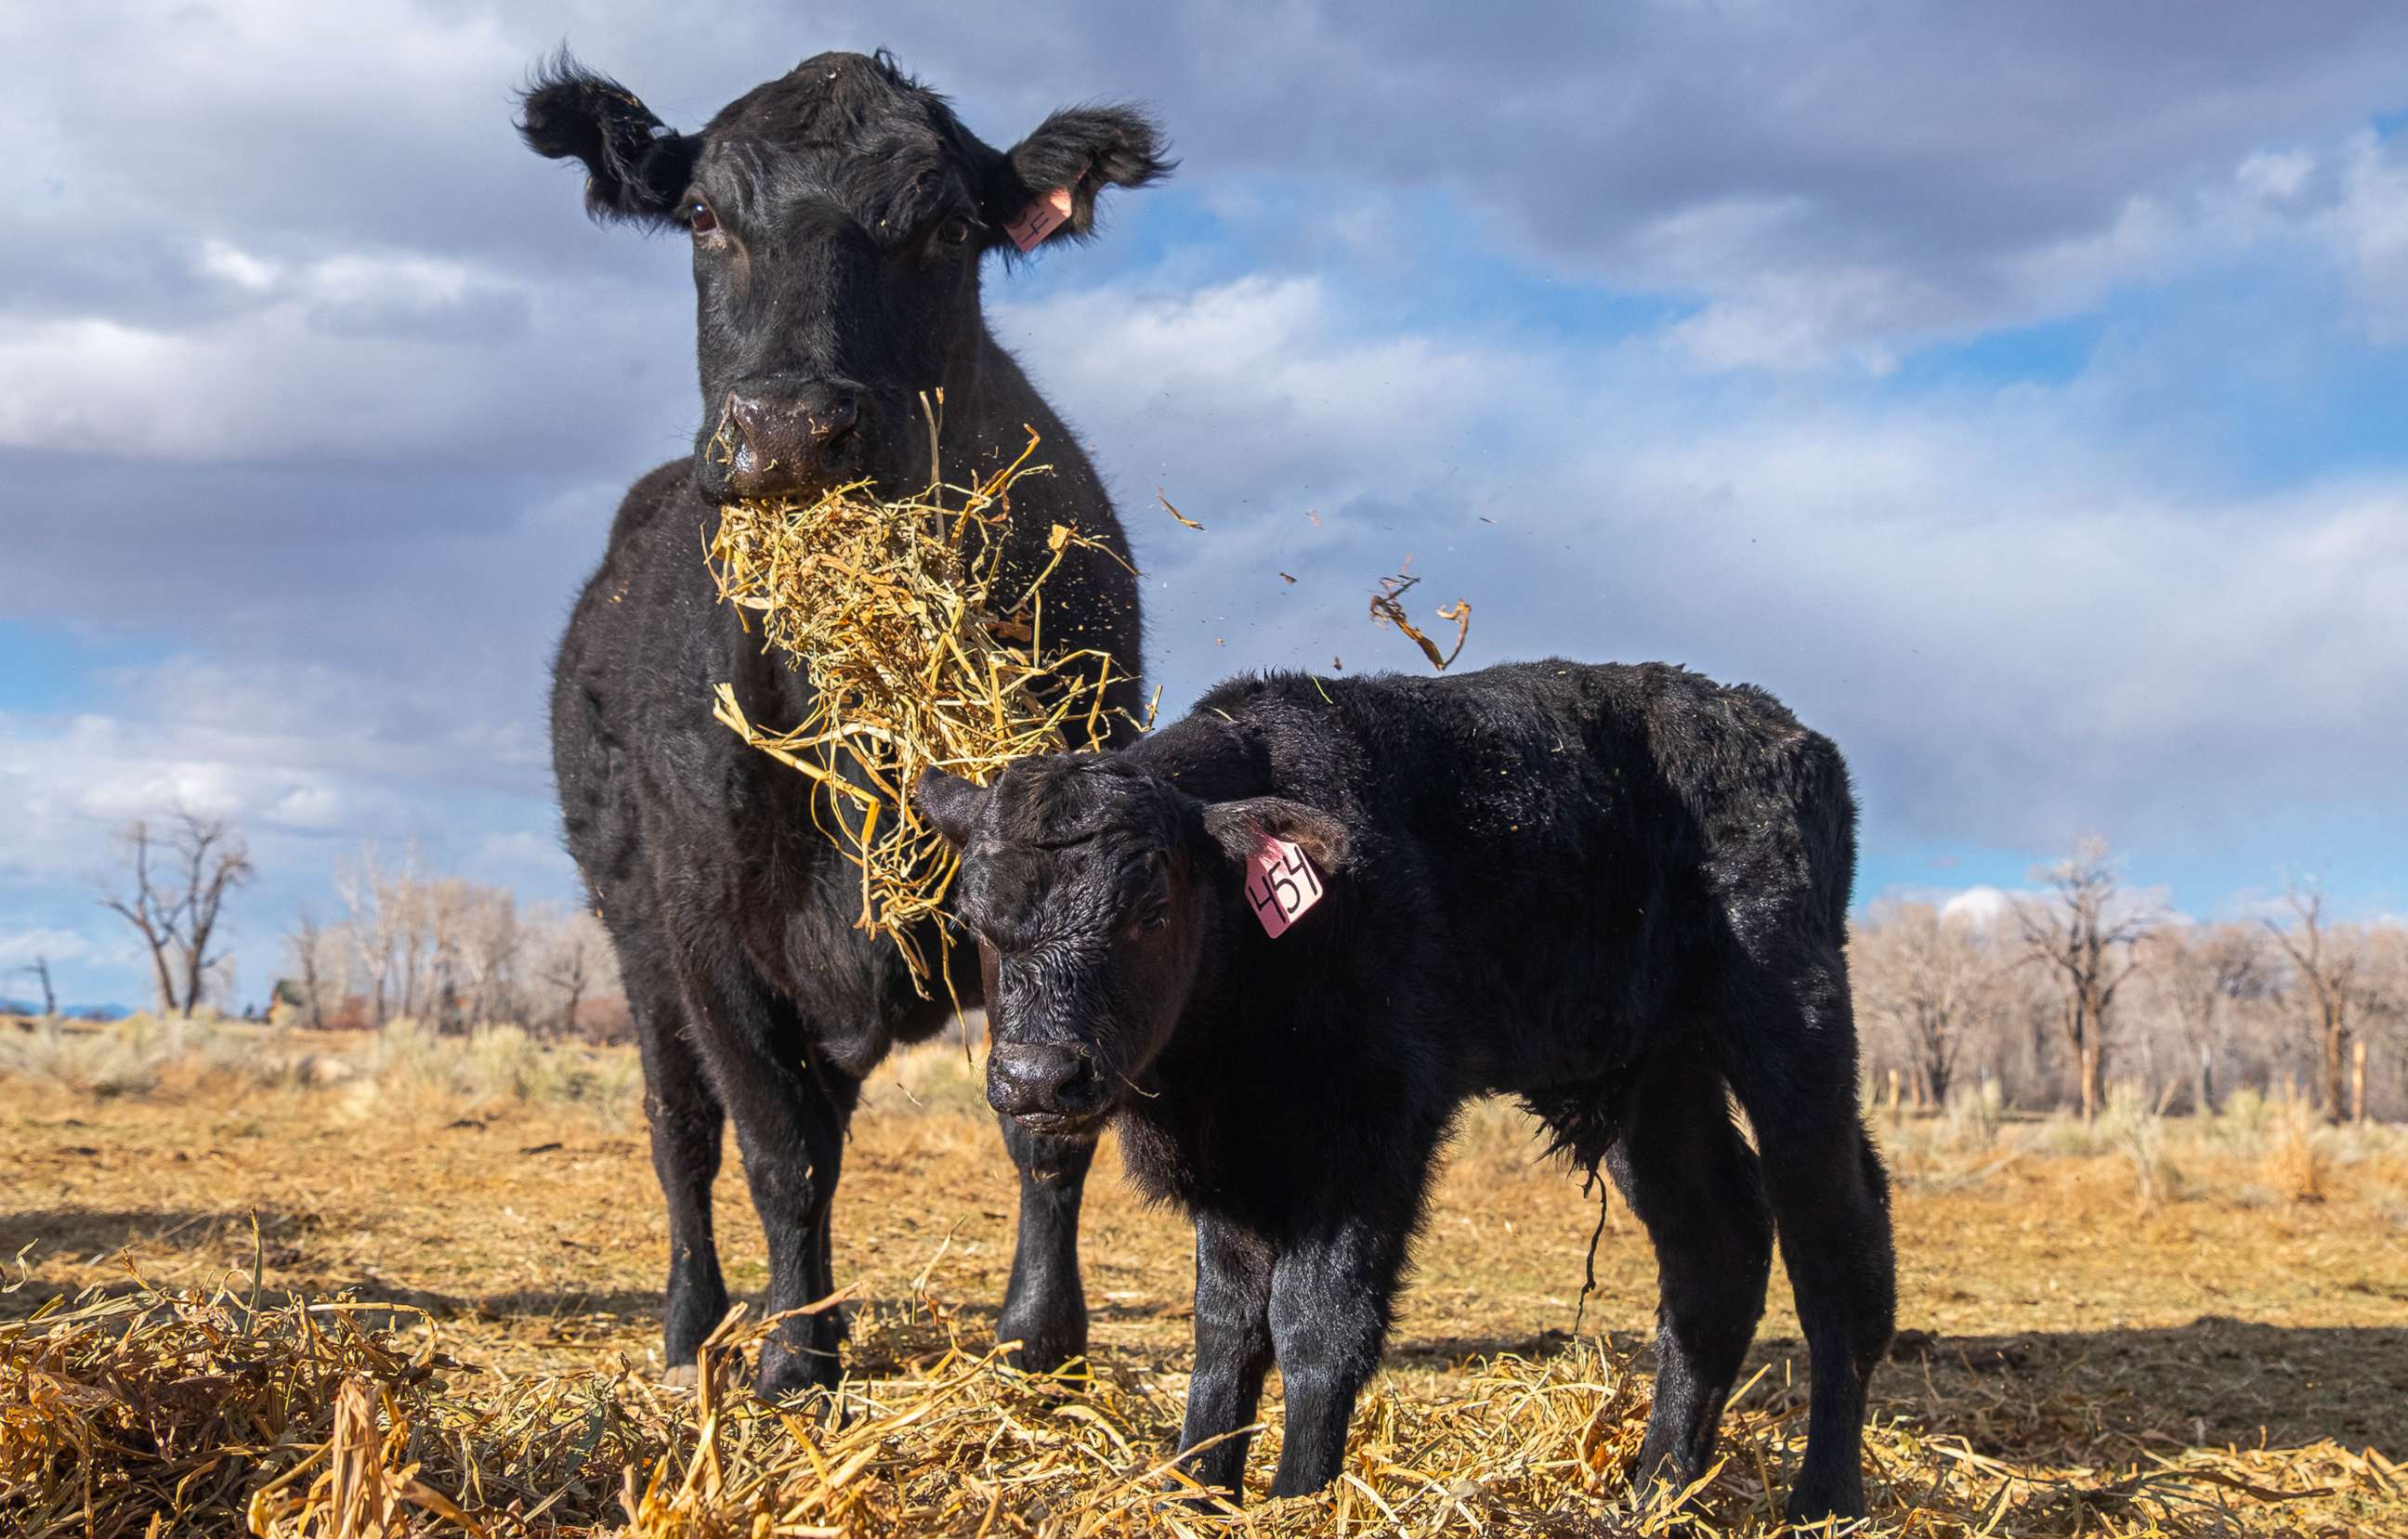 PHOTO: Kyler Brown, a farmer-rancher in Colorado's San Luis Valley, says he has about 100 calves each year that he sells in the fall.